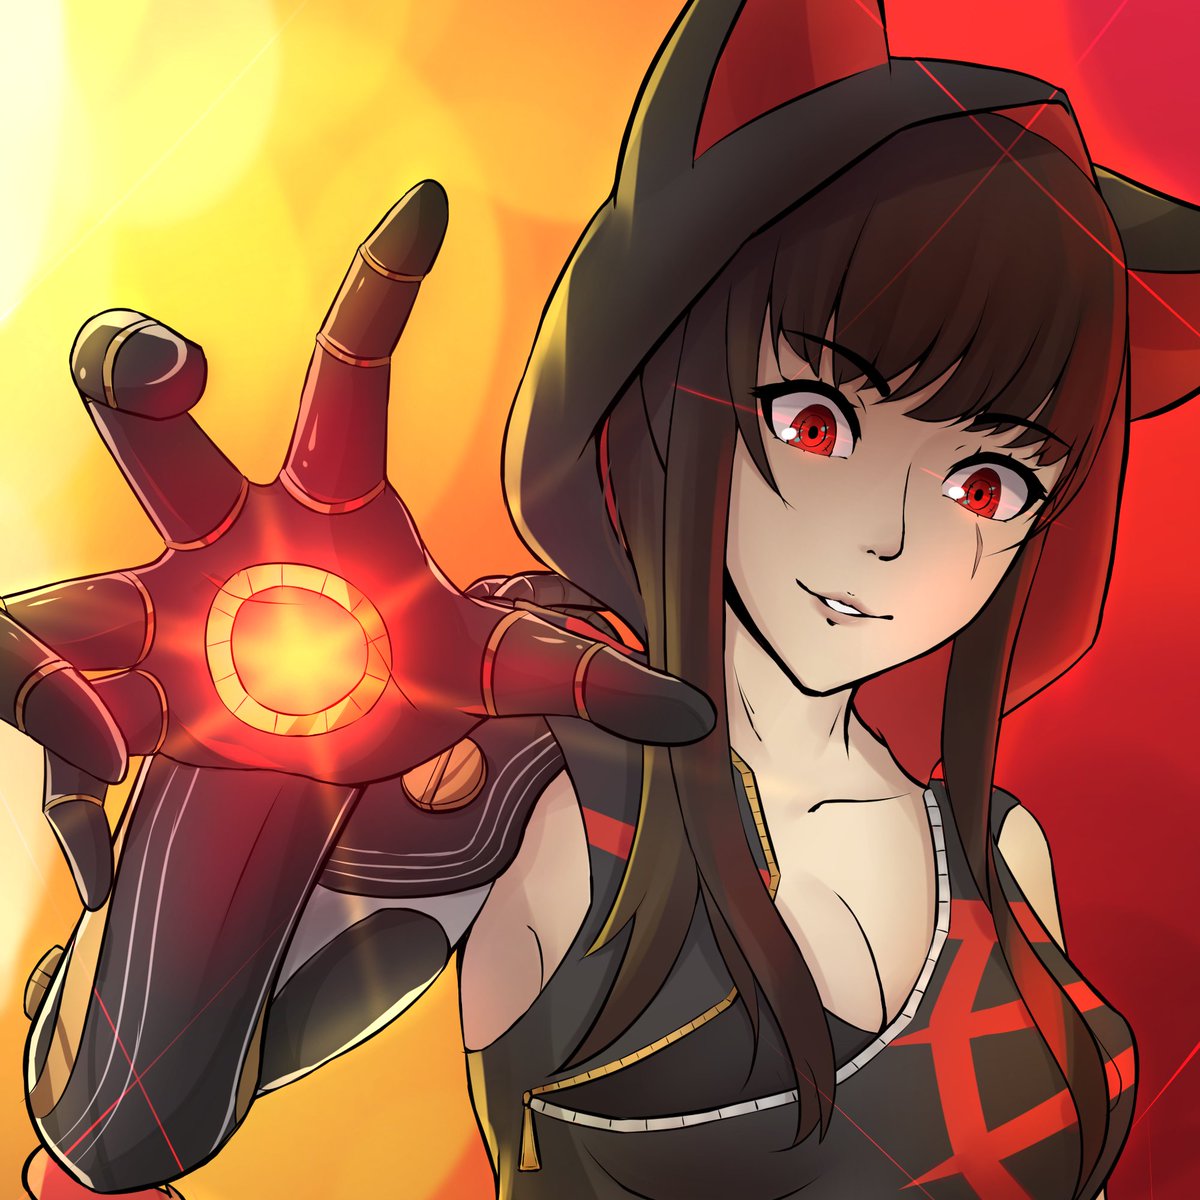 avatar for the vrchat contest. pic.twitter.com/hXYaRxsnIw. 